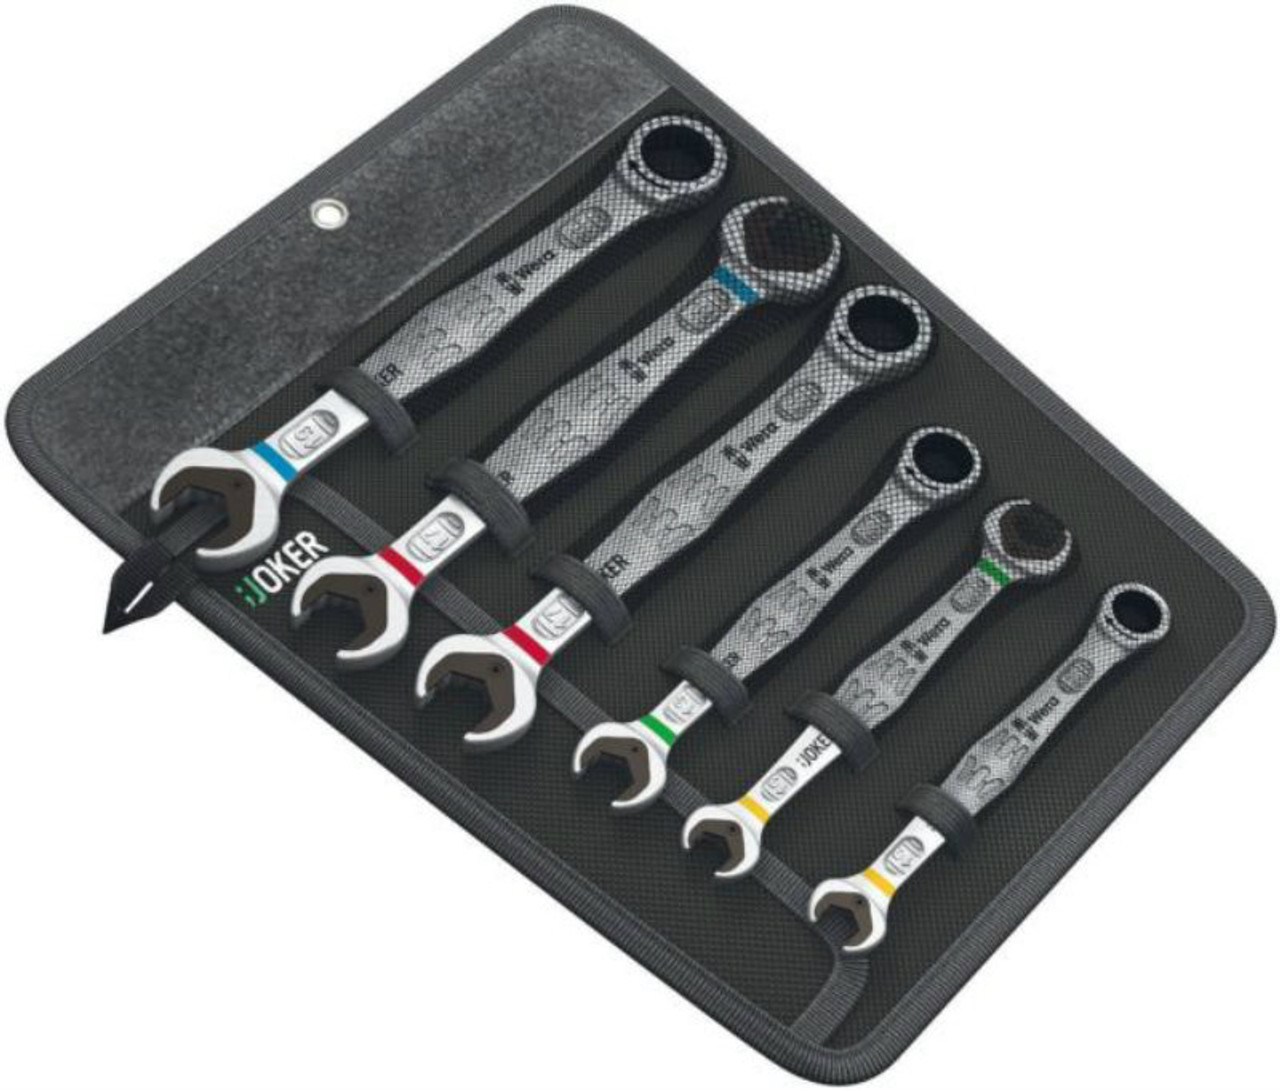 Wera Joker Ratcheting 6 Piece Combination Wrenches (Metric) - Jag10 Tools  and Supplies